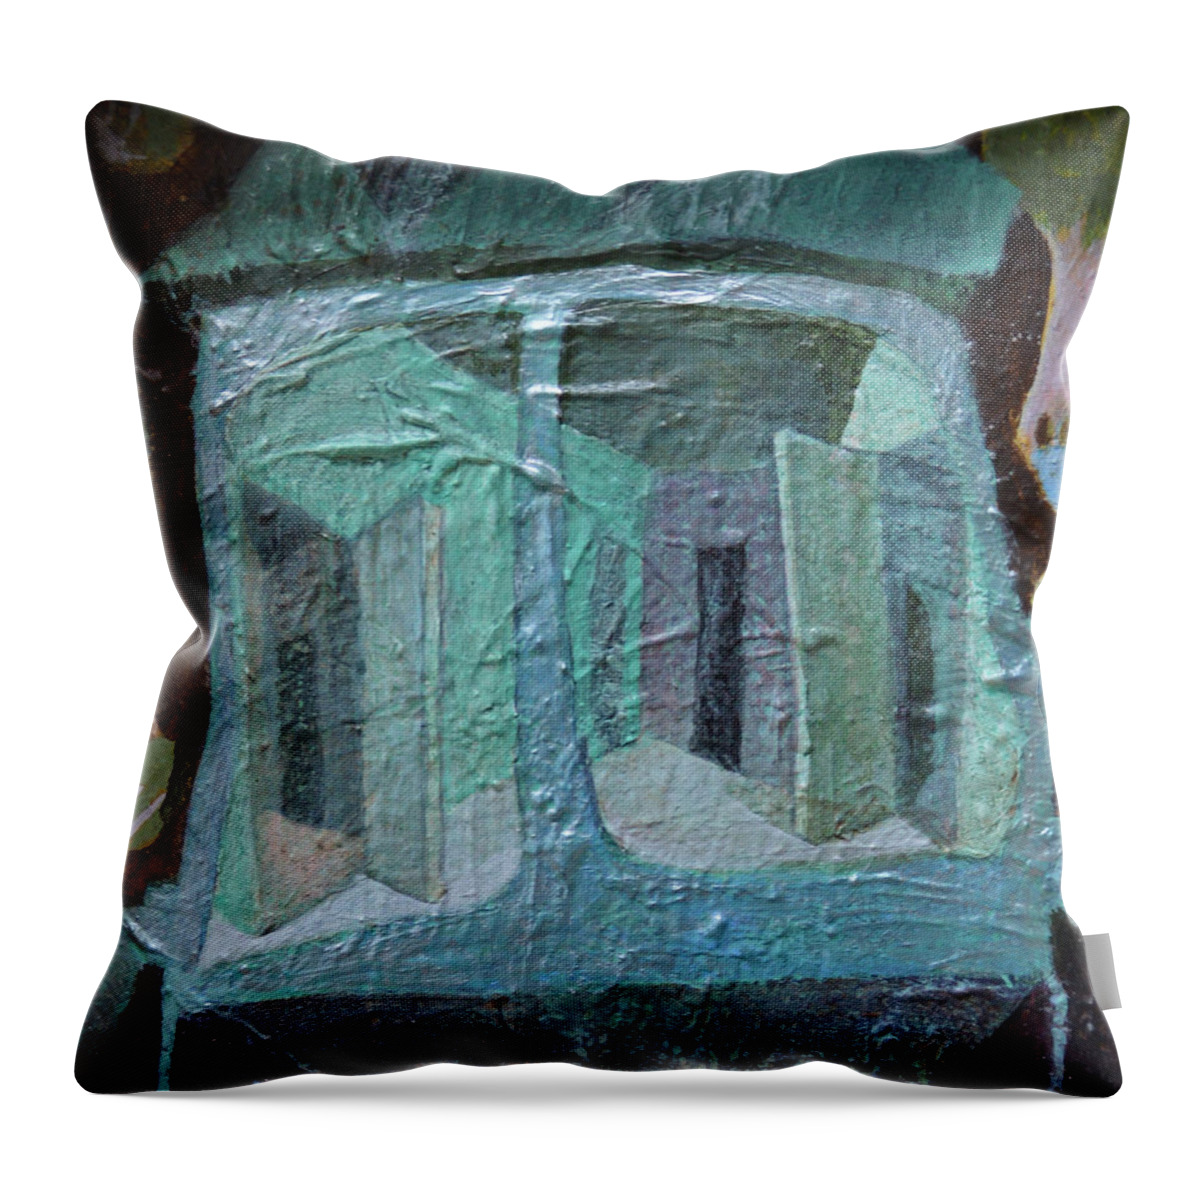 Abstract Modern Outsider Raw Folk House Blue Wheels Roof Door Trees Folk Tree Wheel Green Aqua Shapes Jade Throw Pillow featuring the painting House On Wheels by Nancy Mauerman